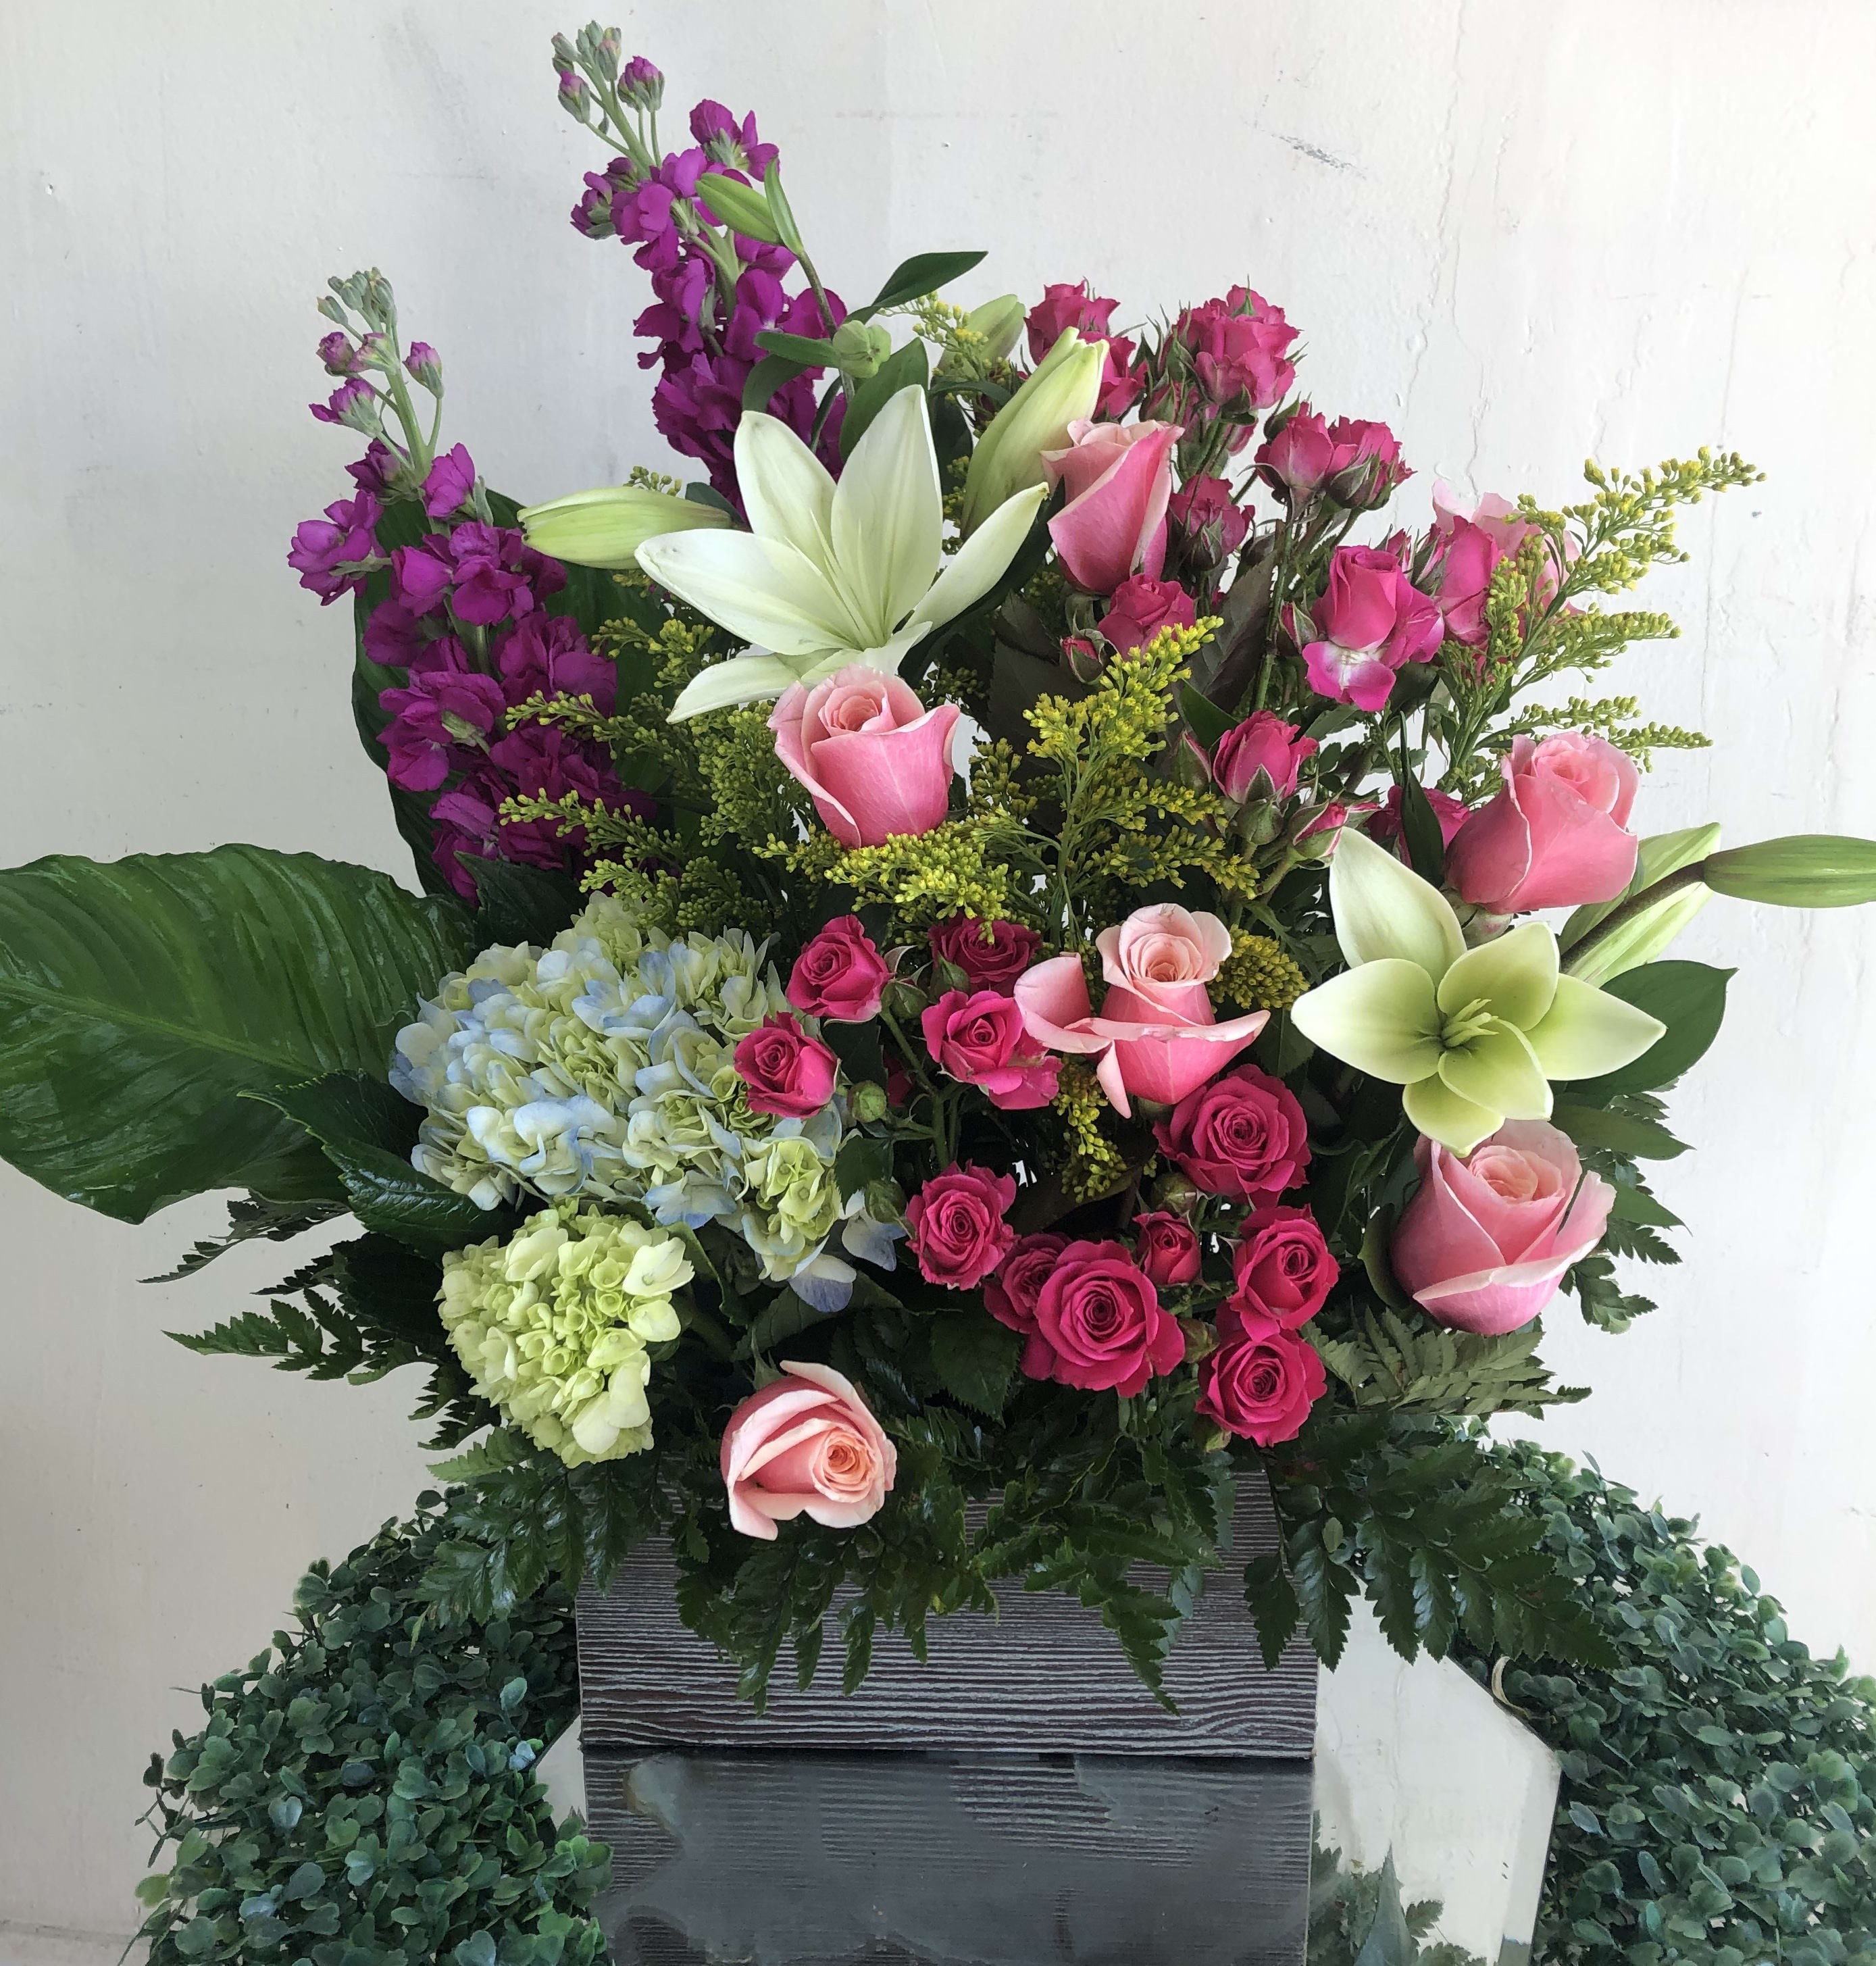 Pink Attraction - Melt the heart of the one you love with this beautiful arrangement of pink spray roses, blue hyndragea, white lilies, roses, purple stocks with fillers in box. 